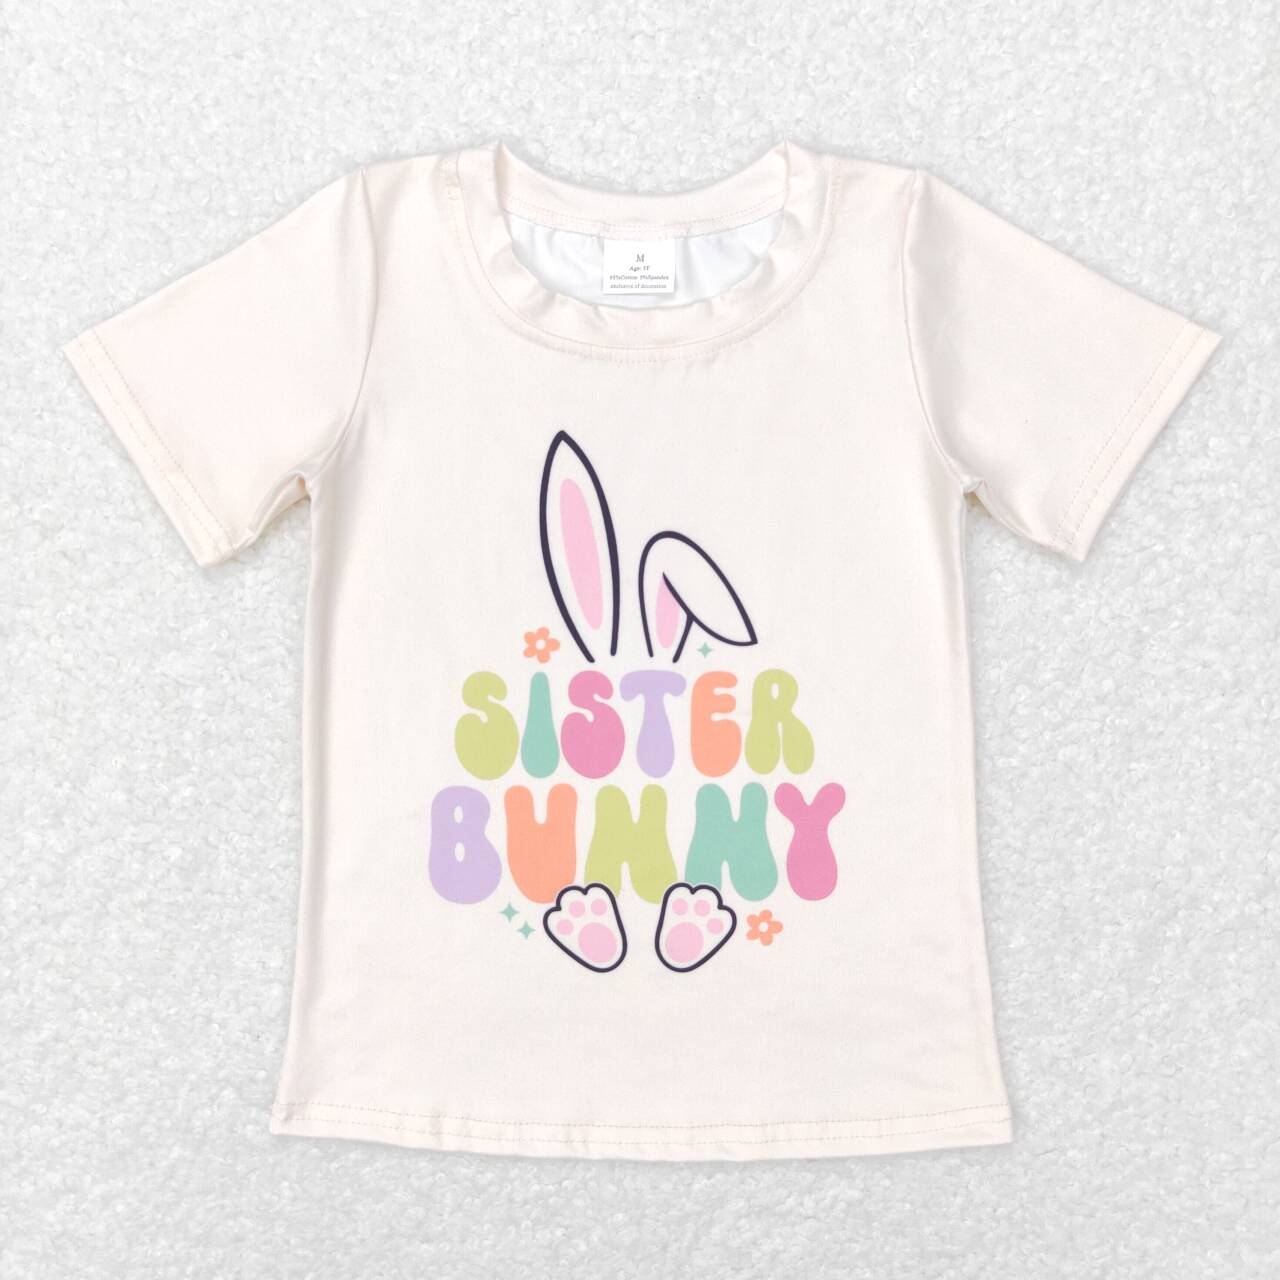 GSPO1133 Sister Bunny Top Pink Stripes Denim Bell Jeans Girls Easter Clothes Set